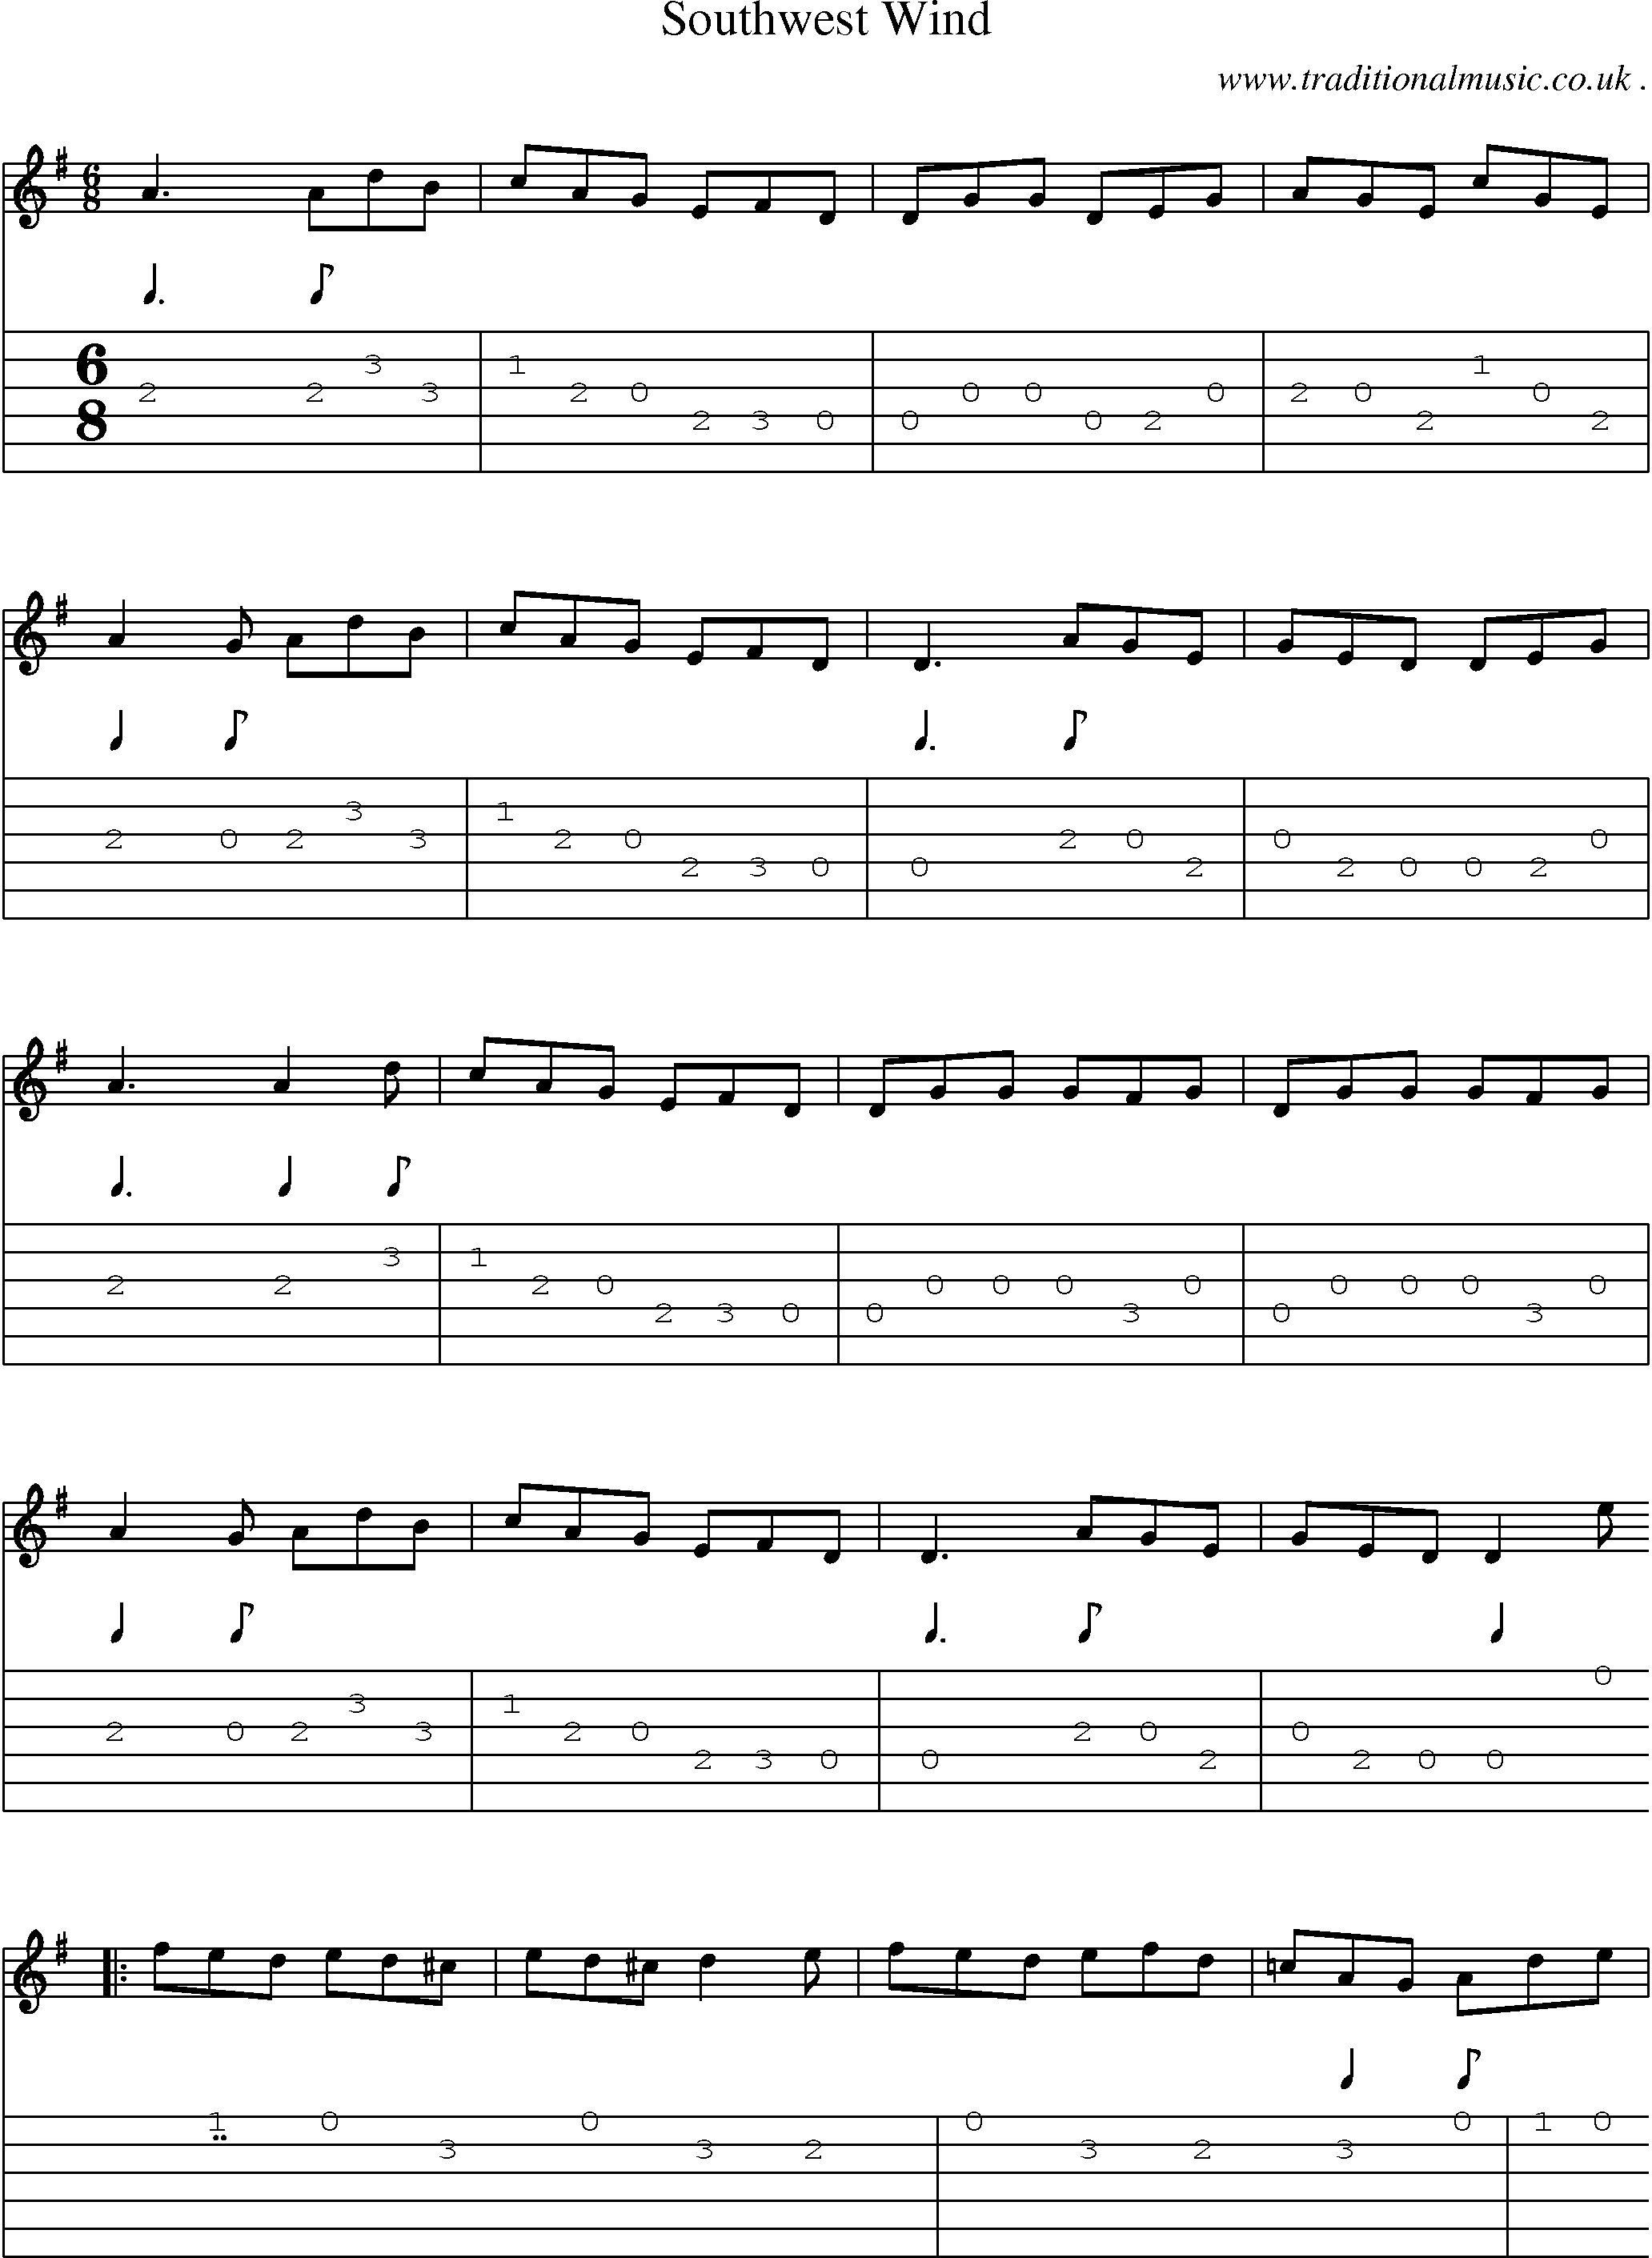 Sheet-Music and Guitar Tabs for Southwest Wind